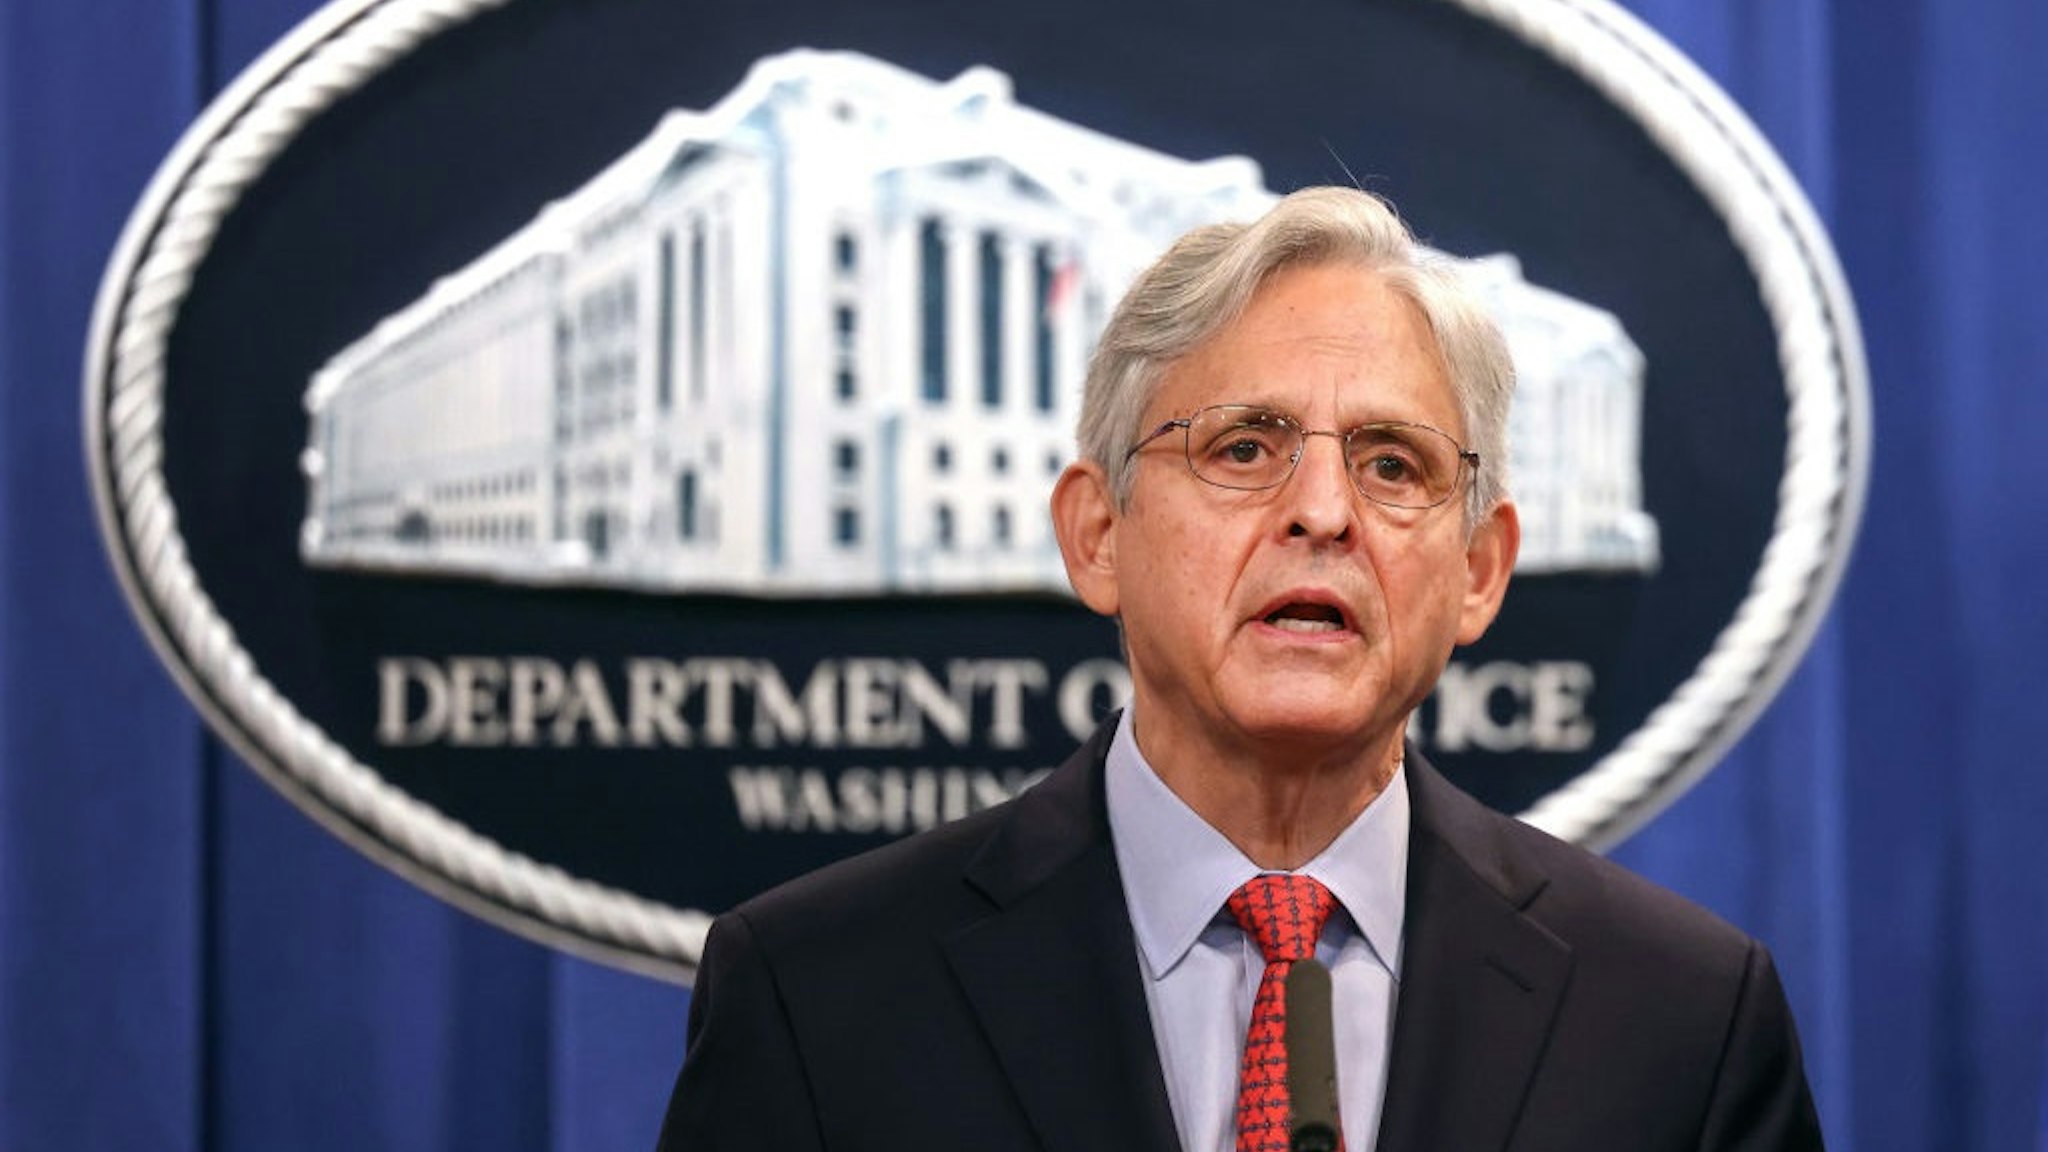 WASHINGTON, DC - AUGUST 05: U.S. Attorney General Merrick Garland announces a federal investigation of the City of Phoenix and the Phoenix Police Department during a news conference at the Department of Justice on August 05, 2021 in Washington, DC.